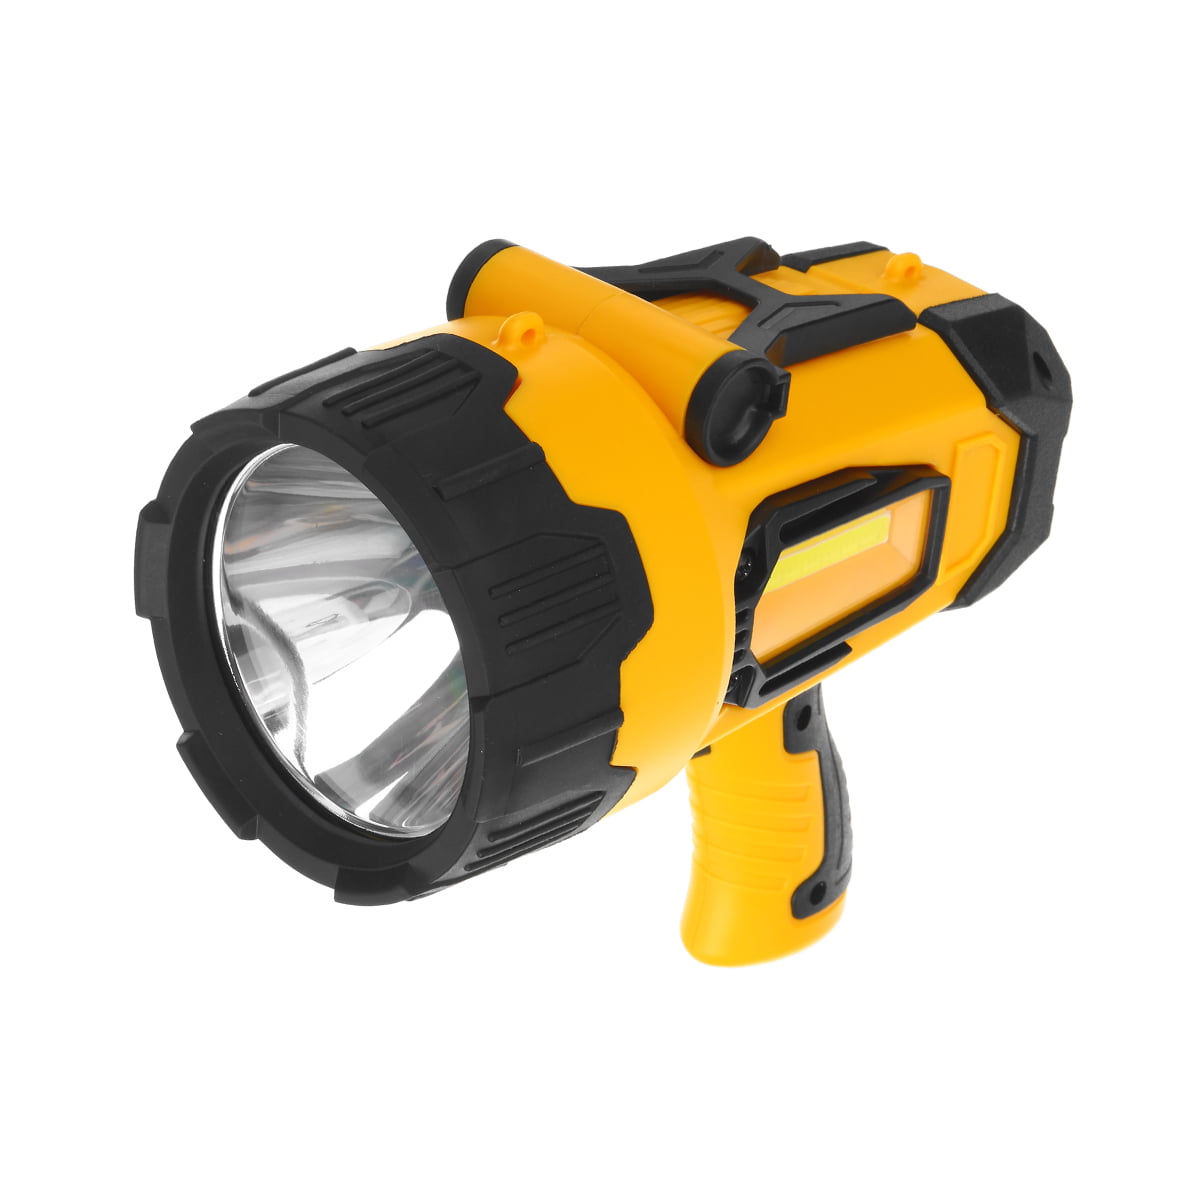 Camping Lamp Emergency Rechargeable Light Spotlight Flashlight Hand Held Torch 